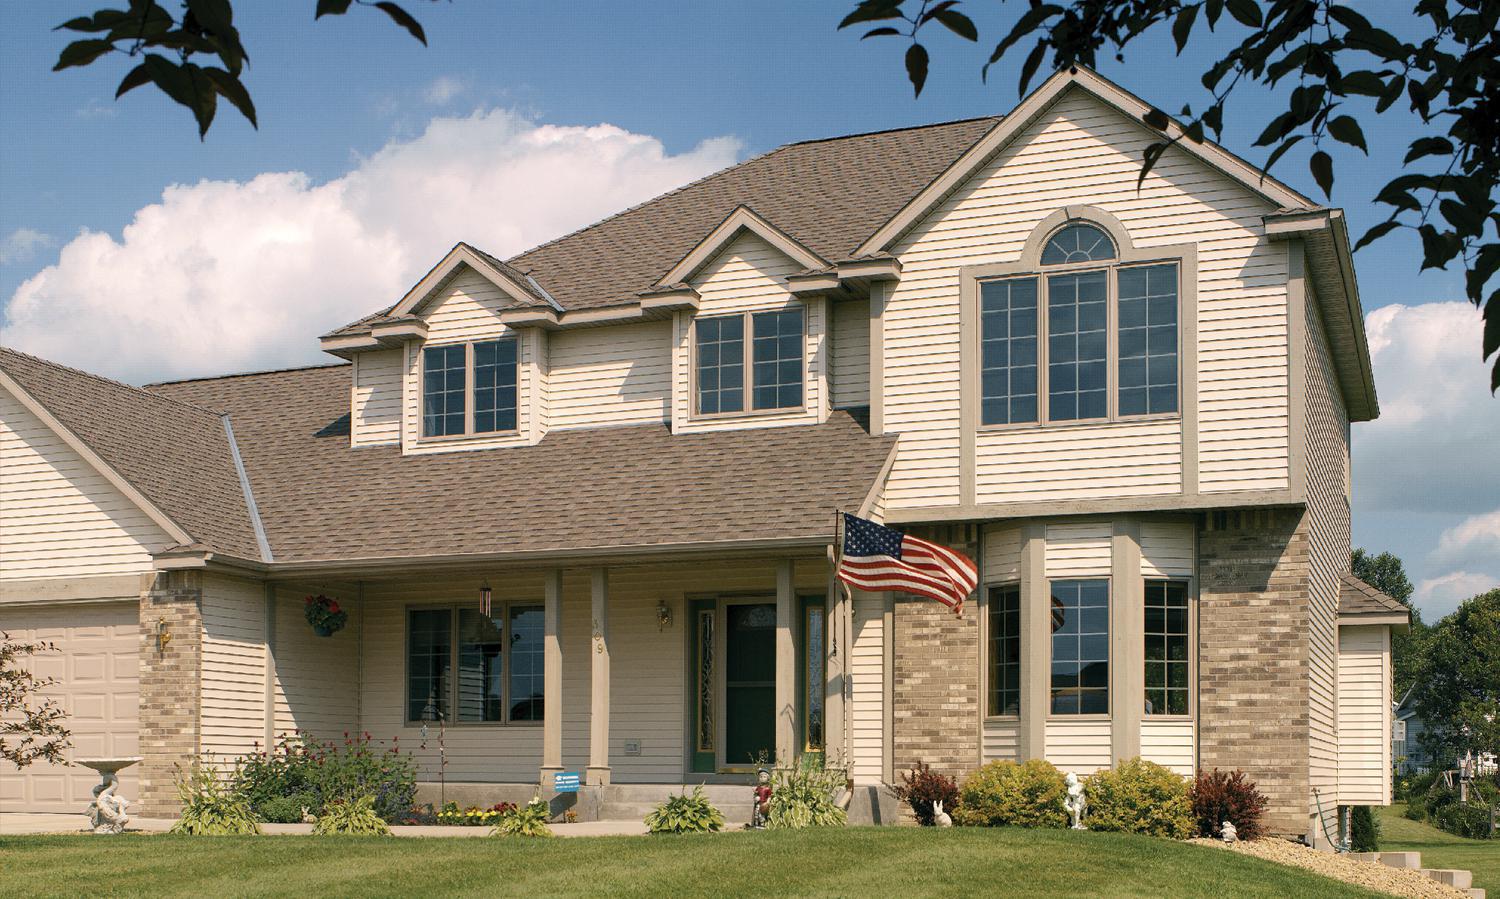 D4 Traditional Lap siding in Wickertone provides for a timeless look that completes the exterior of this home